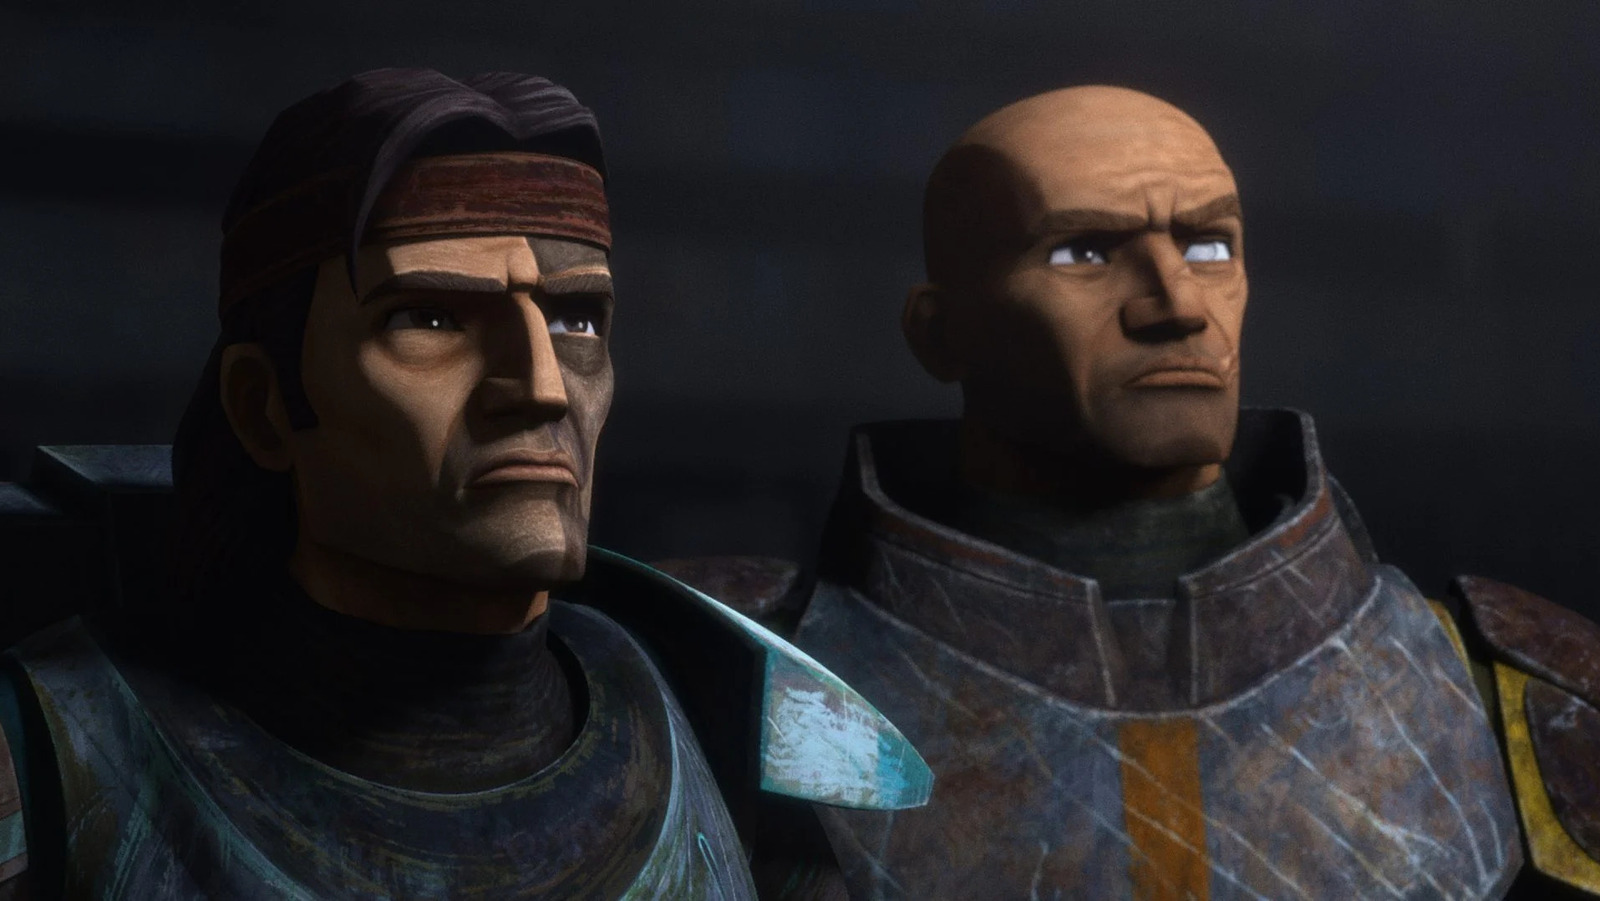 Star Wars: The Bad Batch Season 3 Looks To Payoff A Dangling Clone
Wars Plot Thread